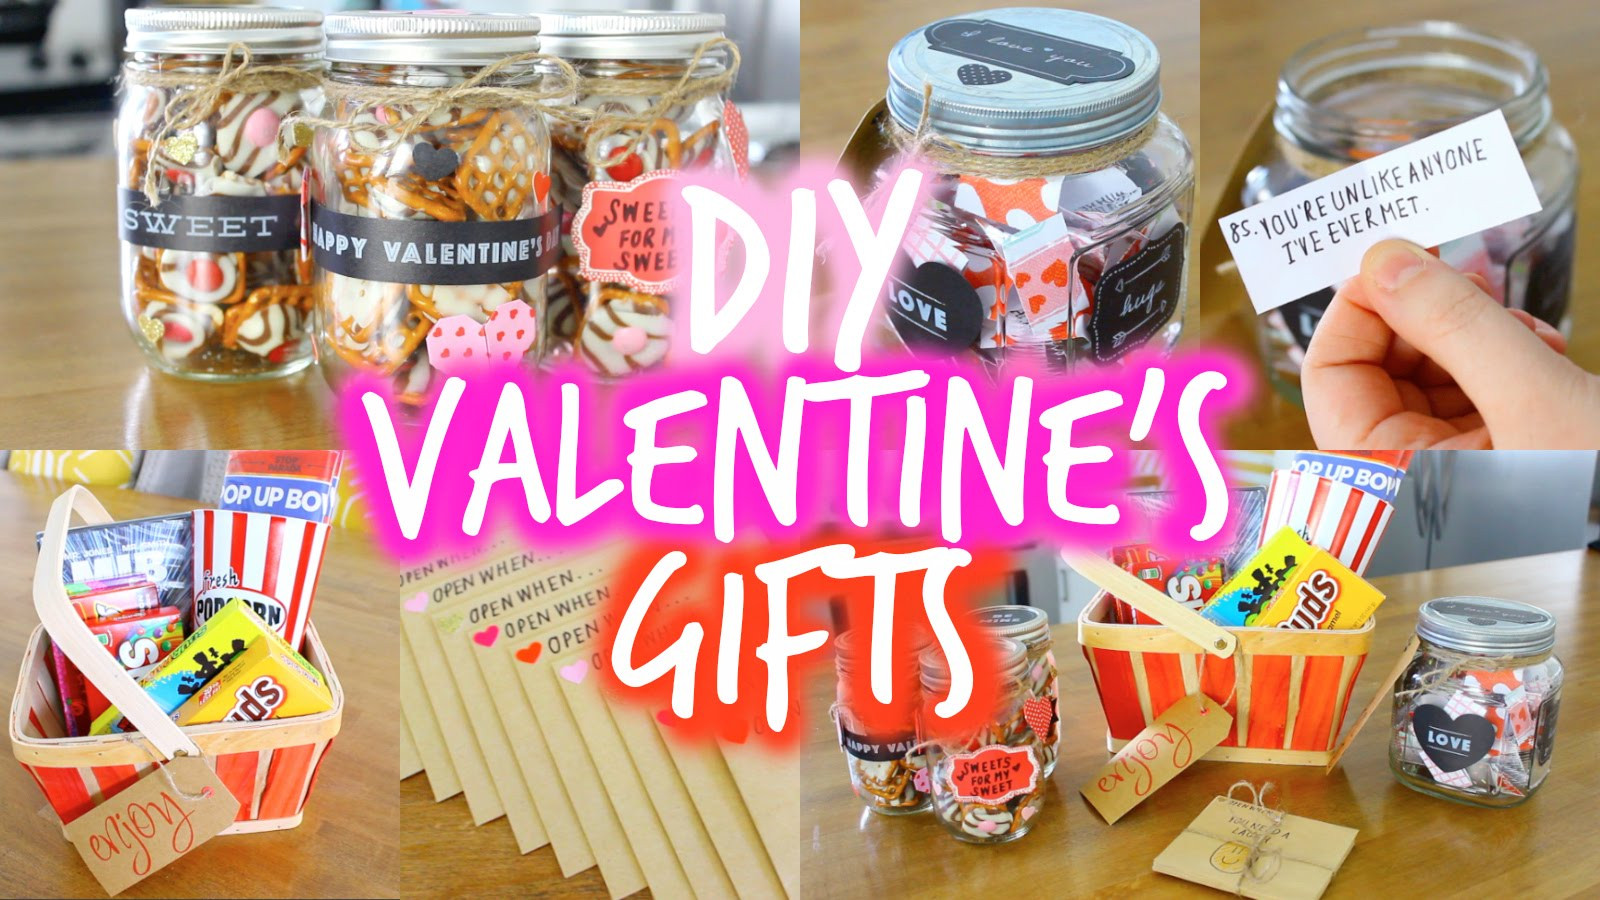 Valentines Gift Ideas For Husbands
 15 Most Romantic Valentine DIY Gift For Husband The Xerxes